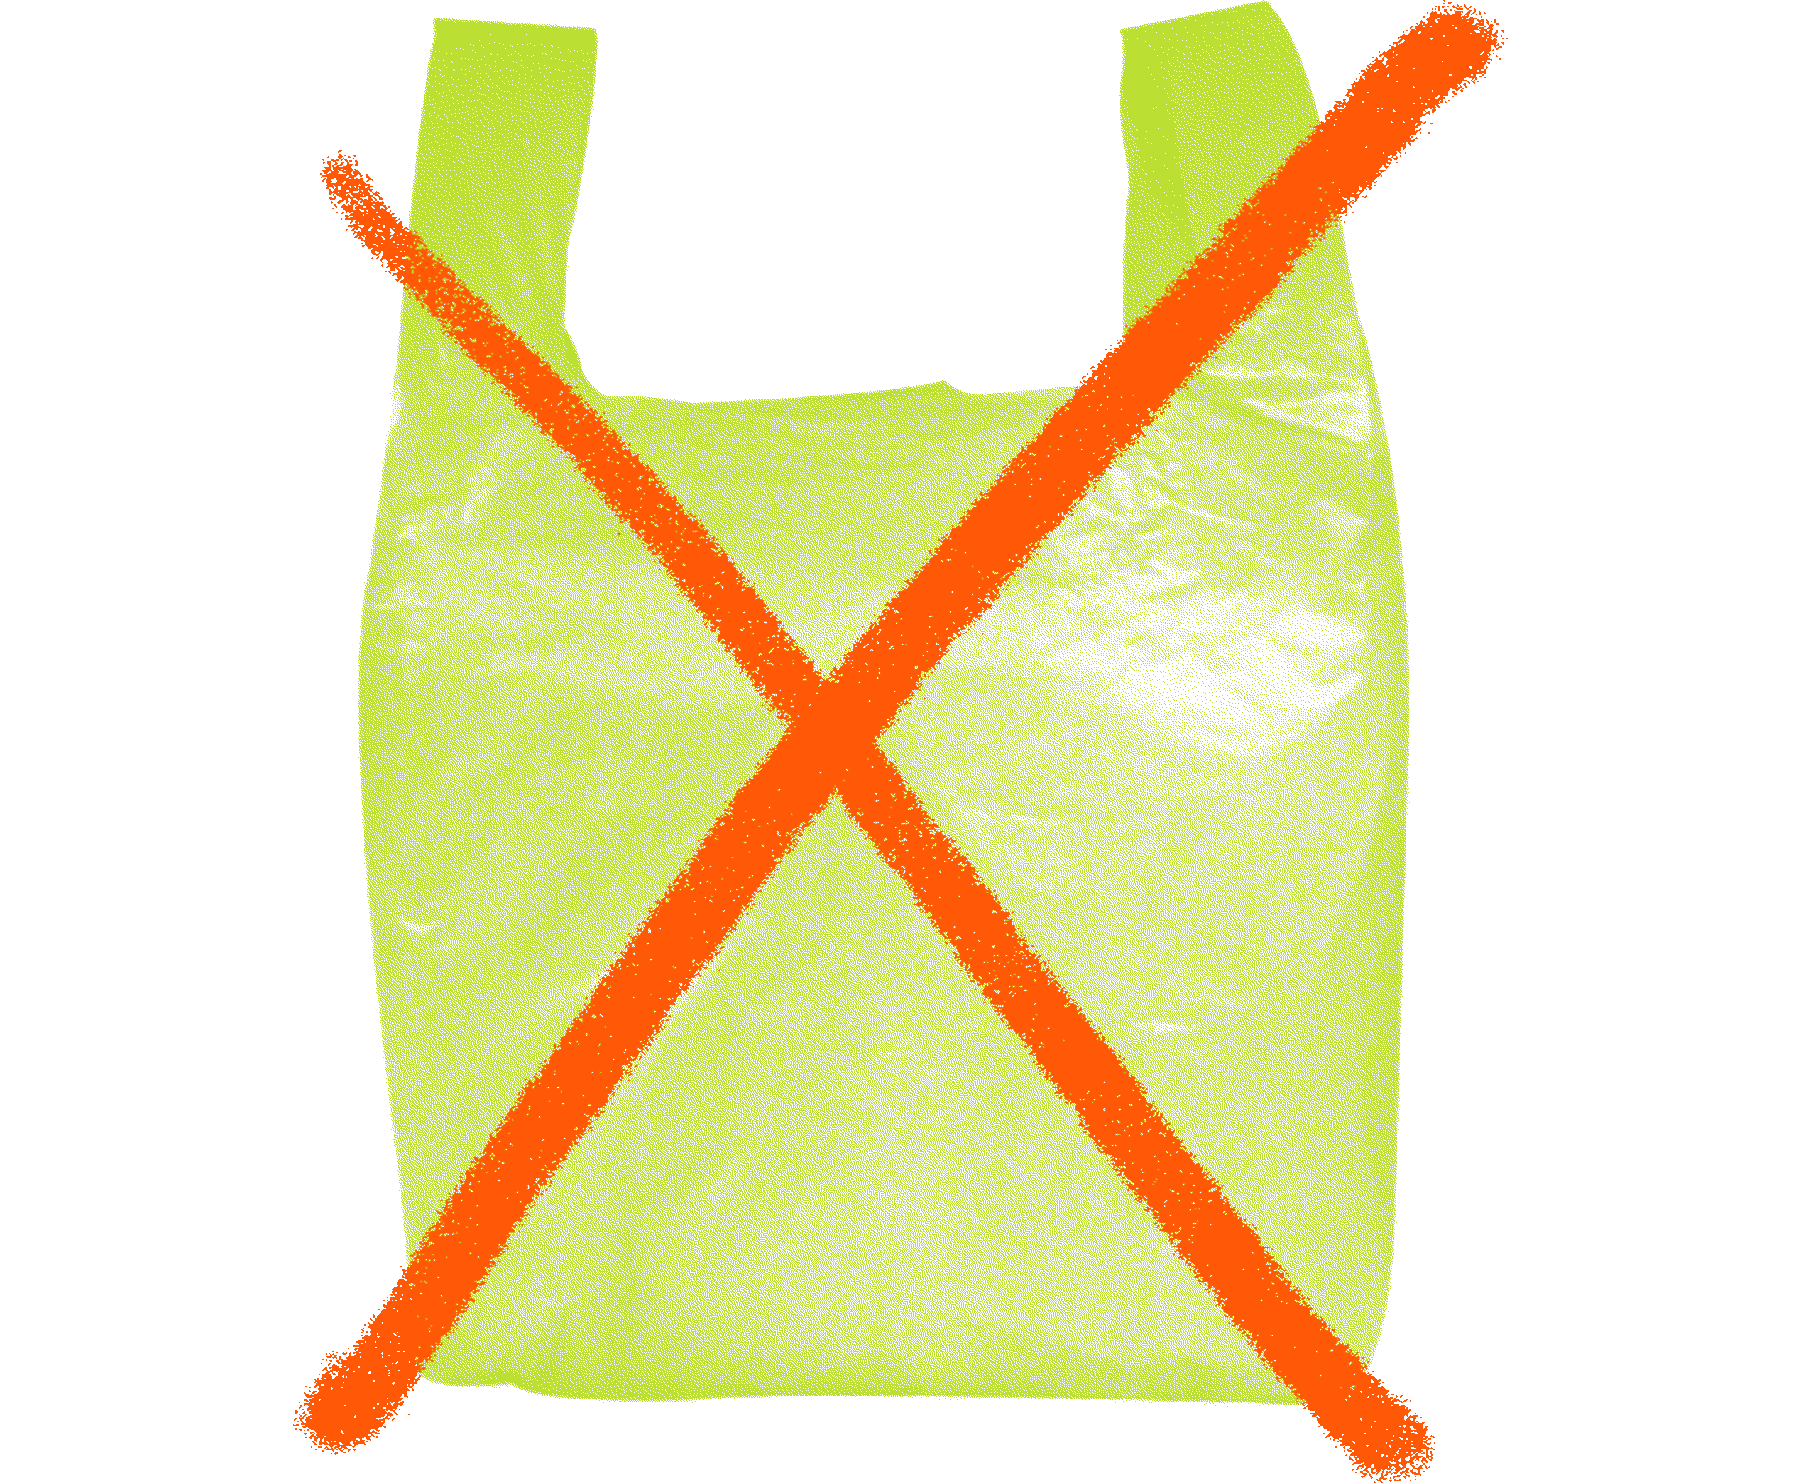 Animated graphic of a plastic bag